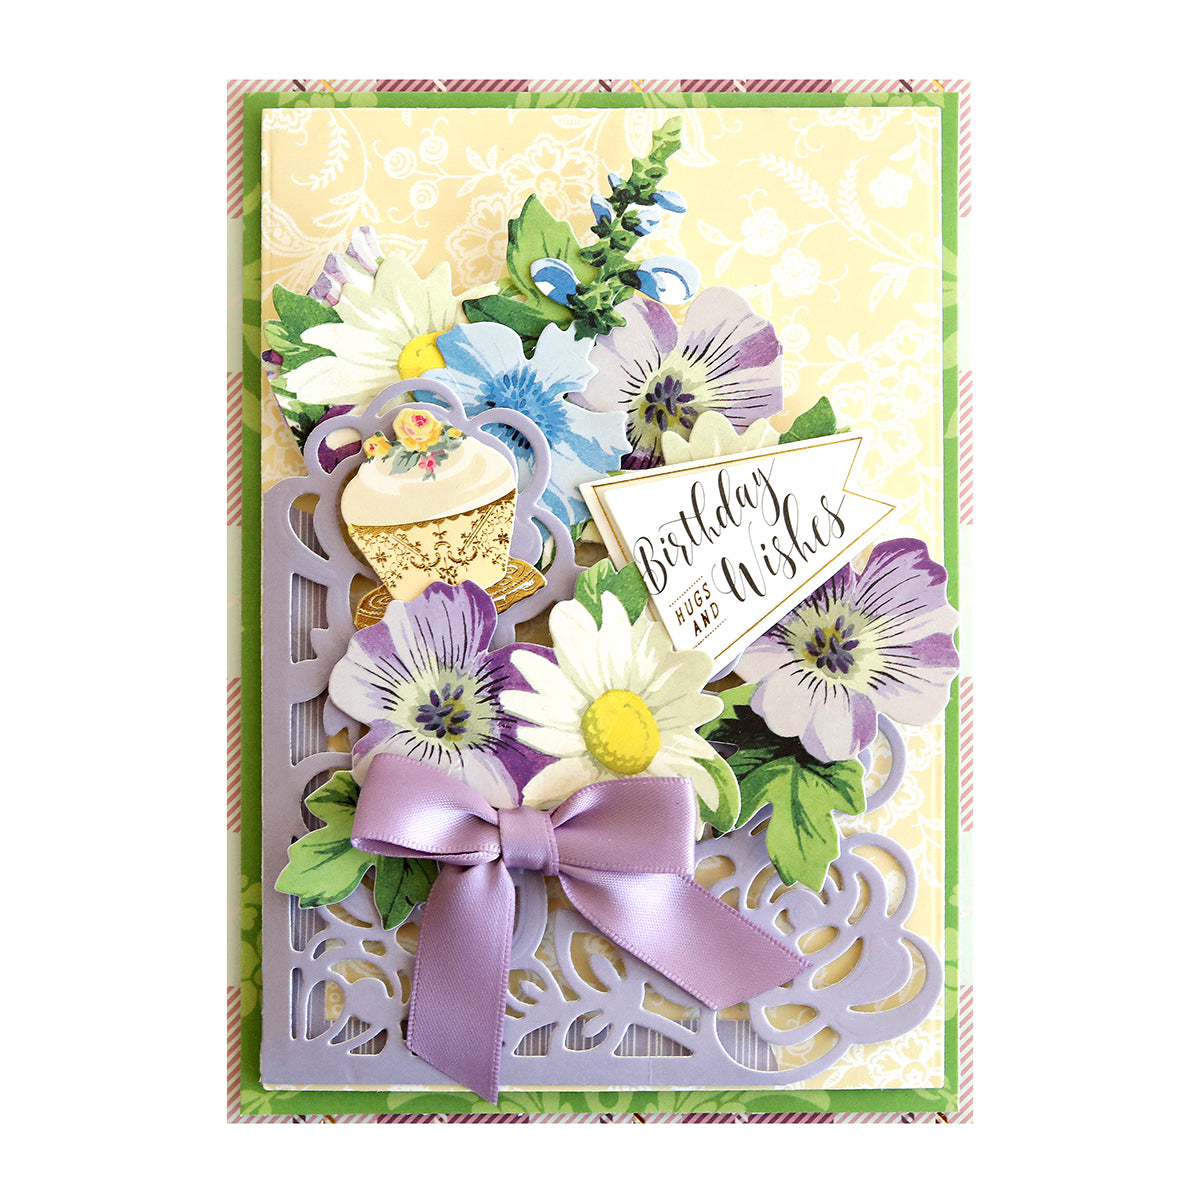 An elegant Anniversary Pocket Dies adorned with flowers and a bow.